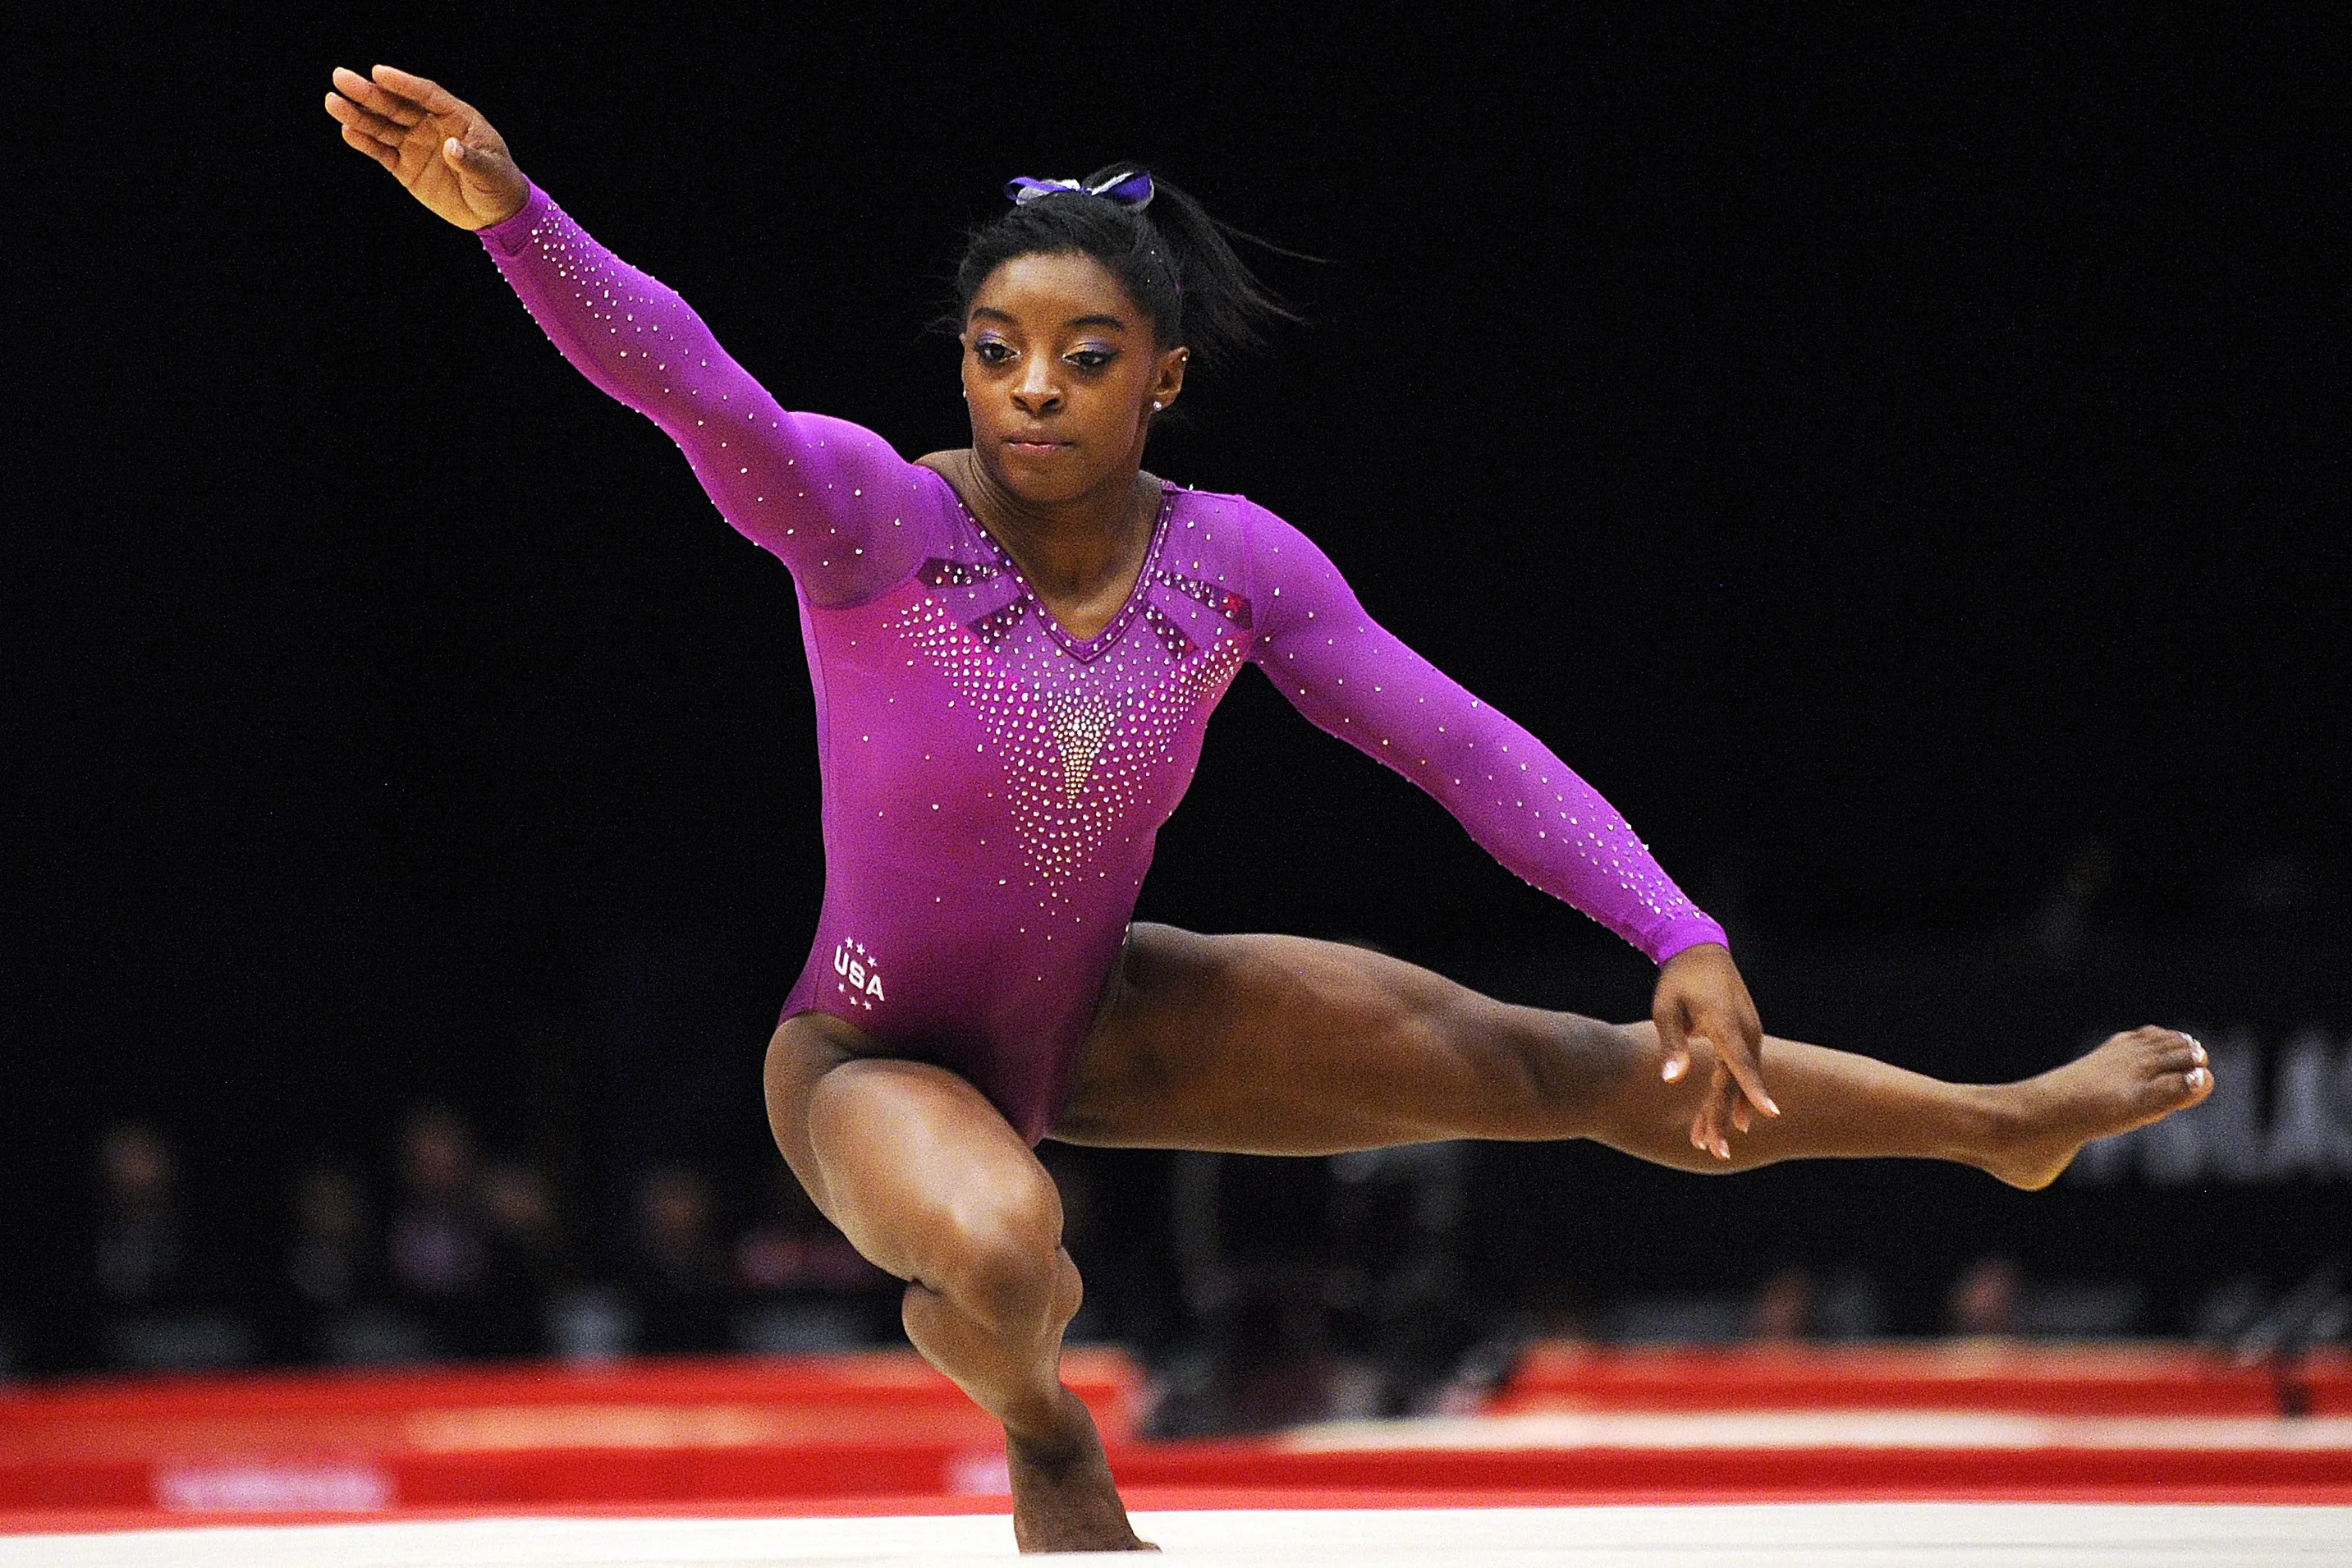 What is the name of the gymnastics move where the gymnast flips forward and twists at the same time?